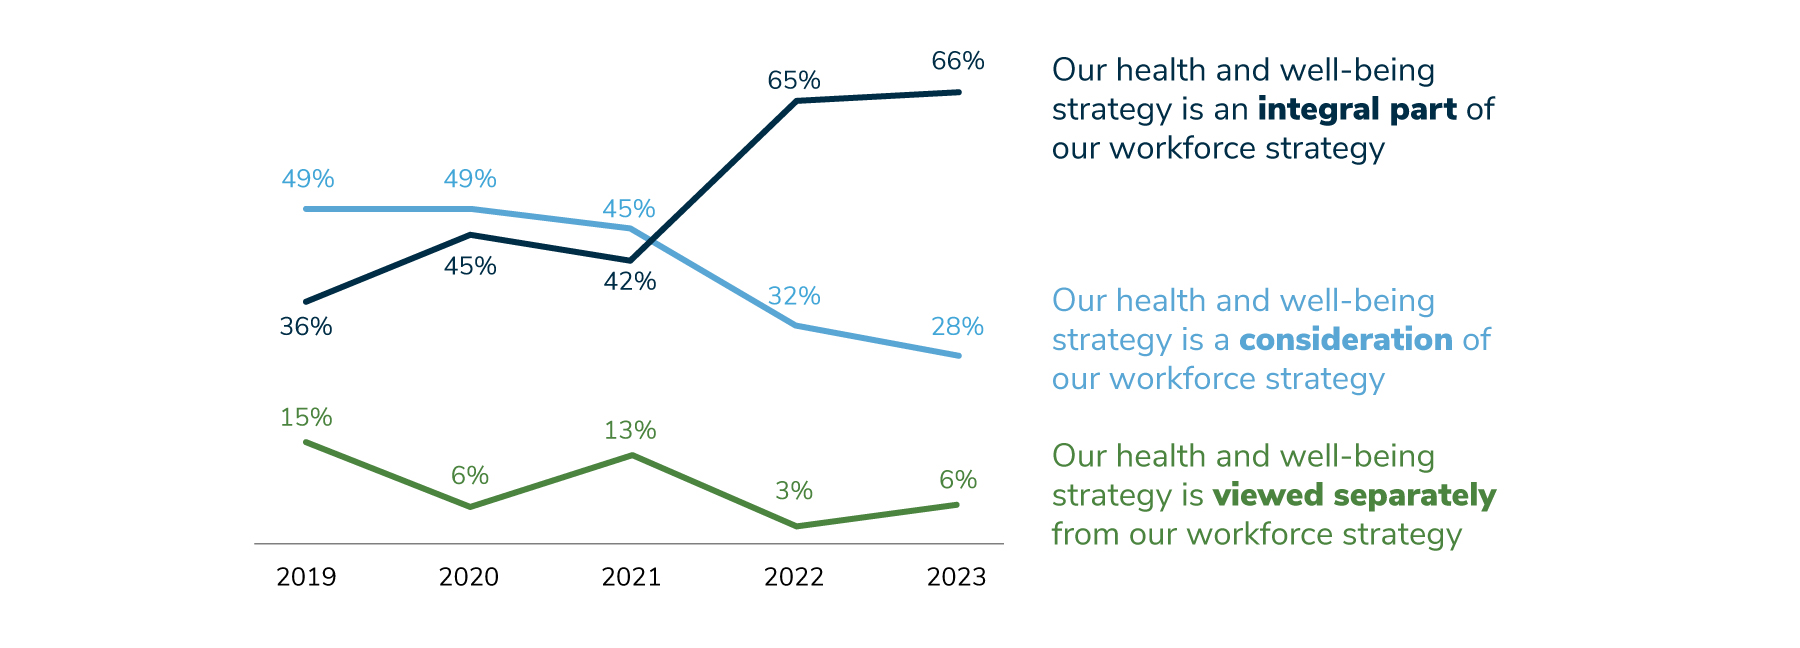 66% of respondents view health and well-being as integral to their workforce strategy, and 28% report that is a consideration in their workforce strategy.